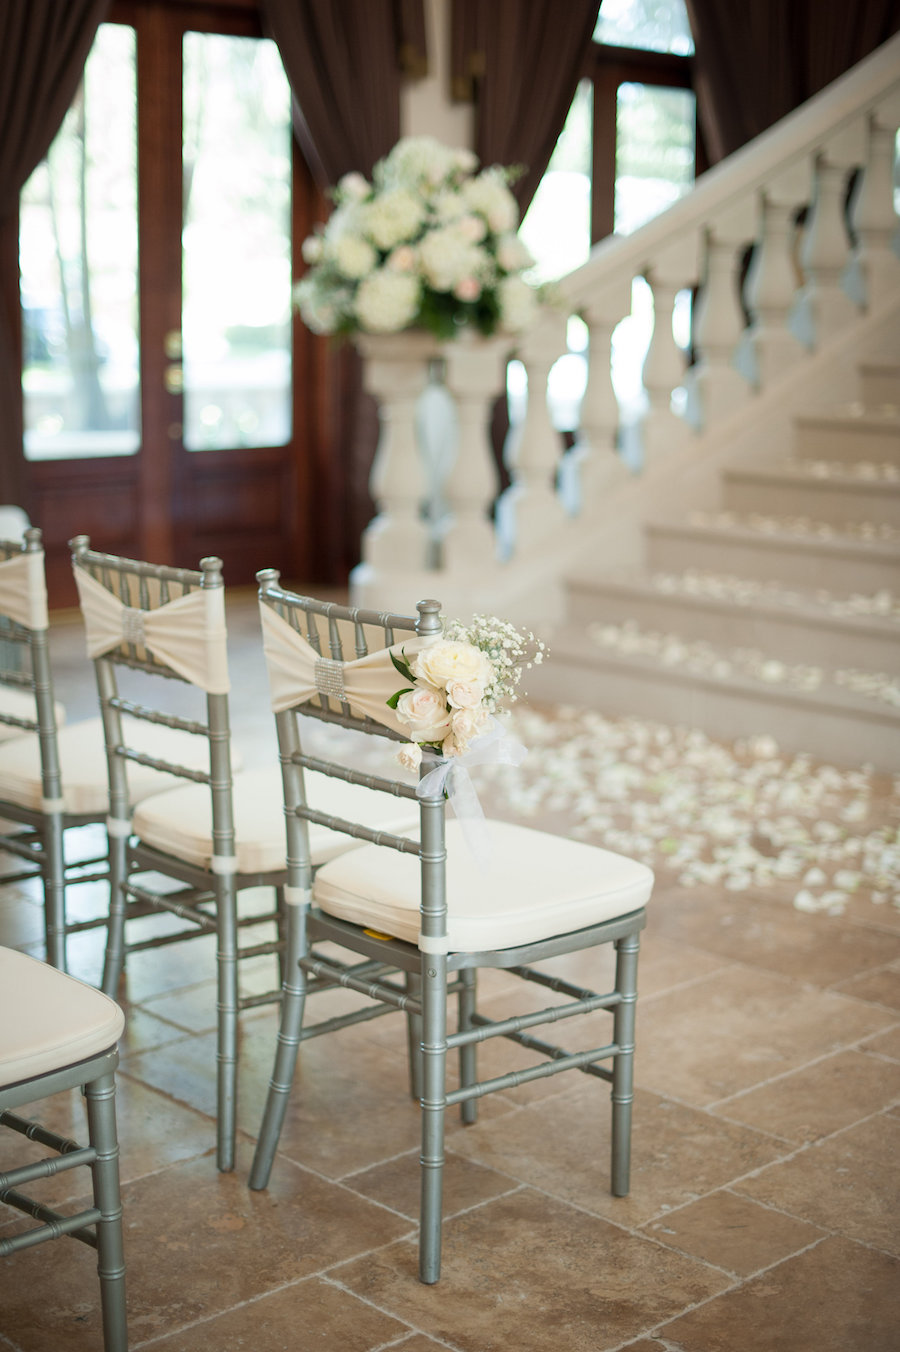 Indoor, Private Residence Wedding Ceremony with Silver Chiavari Chairs and Ivory Flower Petals